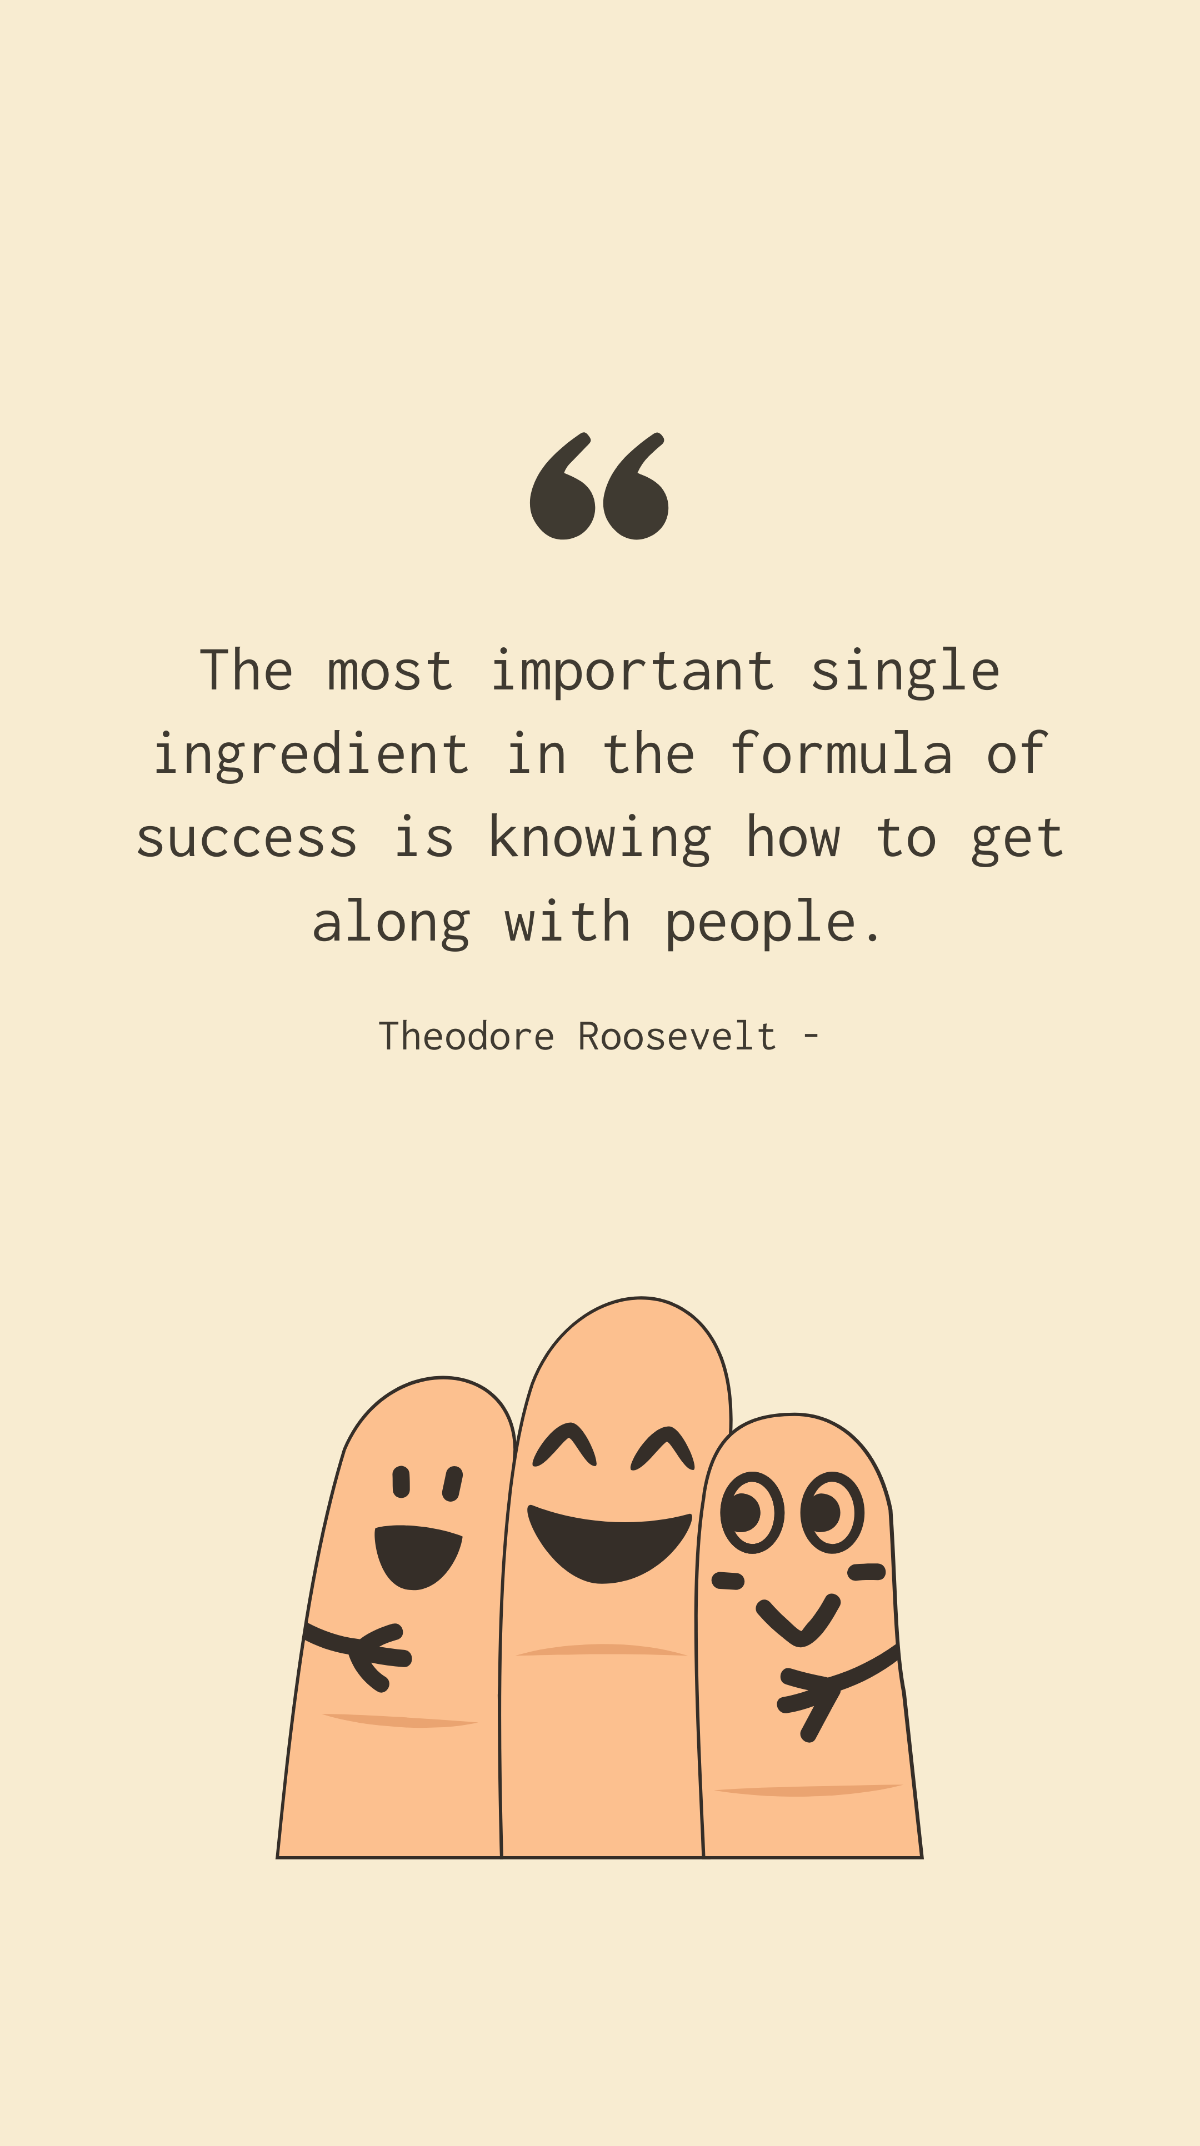 Theodore Roosevelt - The most important single ingredient in the formula of success is knowing how to get along with people. Template